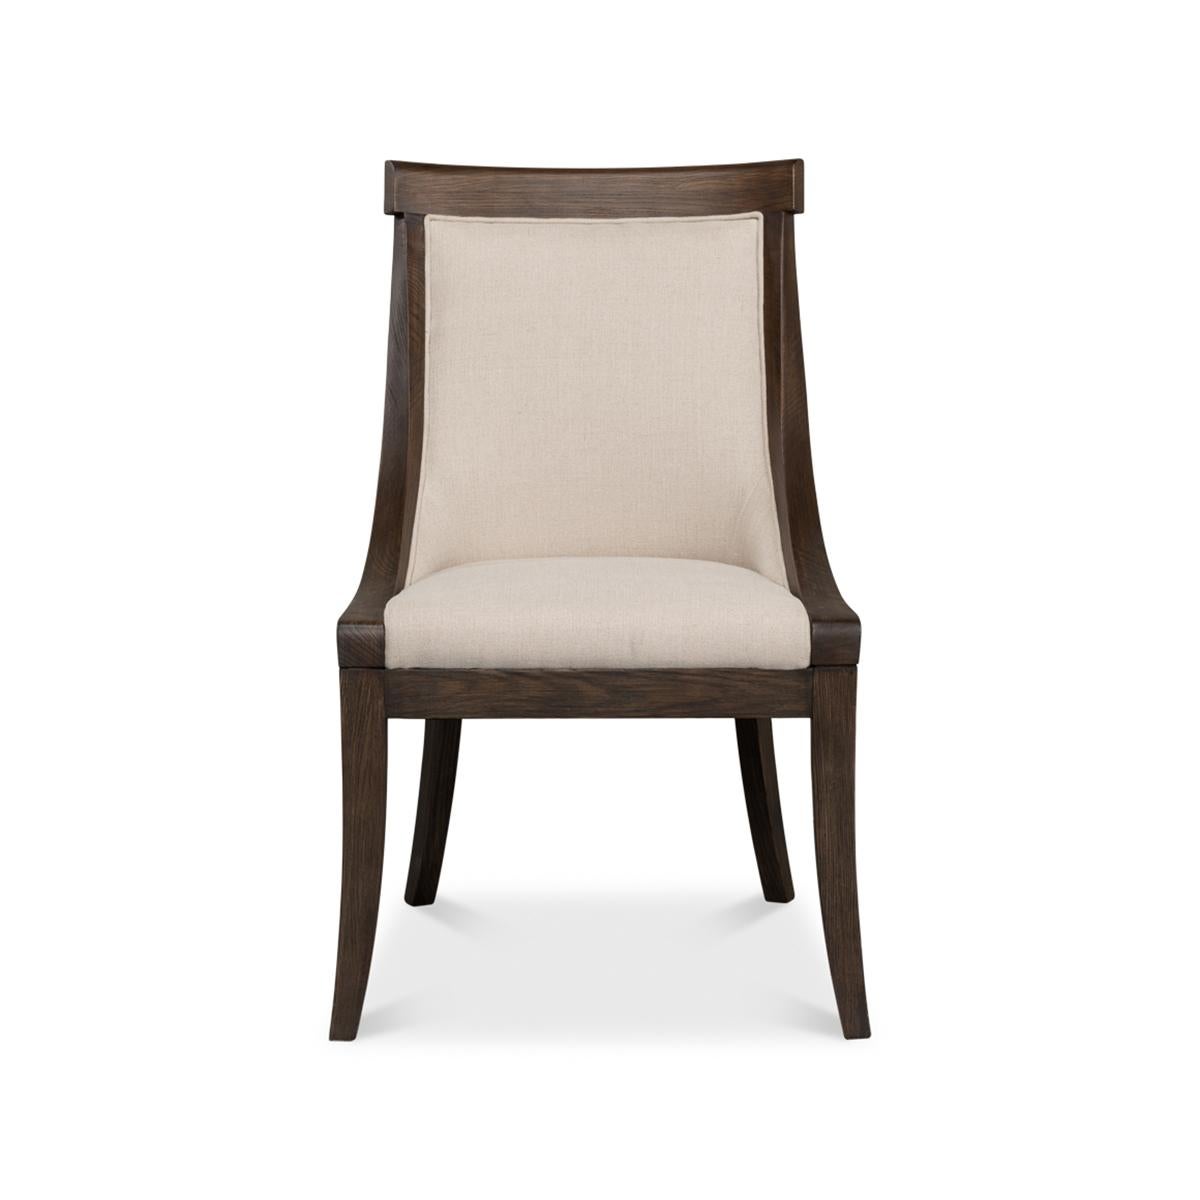 Classic ash dining chair, a timeless classic that adds drama, commands attention, and often brings all the design elements of a room into a cohesive focus. With exposed beautifully finished Ash framing and a luxurious linen cover.

The curved